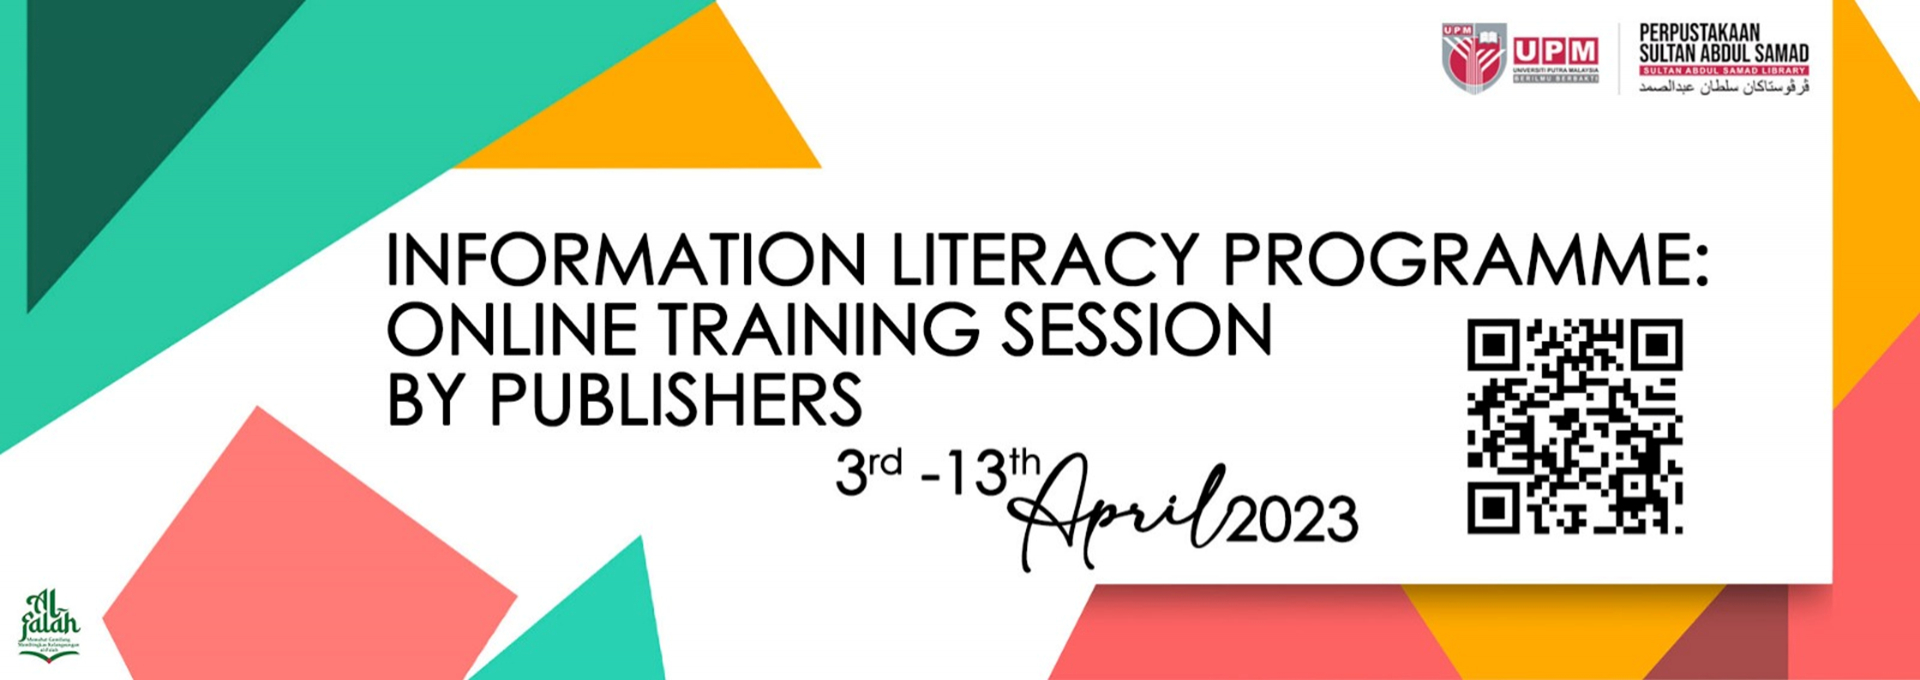 Information Literacy Programme : ONLINE TRAINING SESSION BY PUBLISHERS